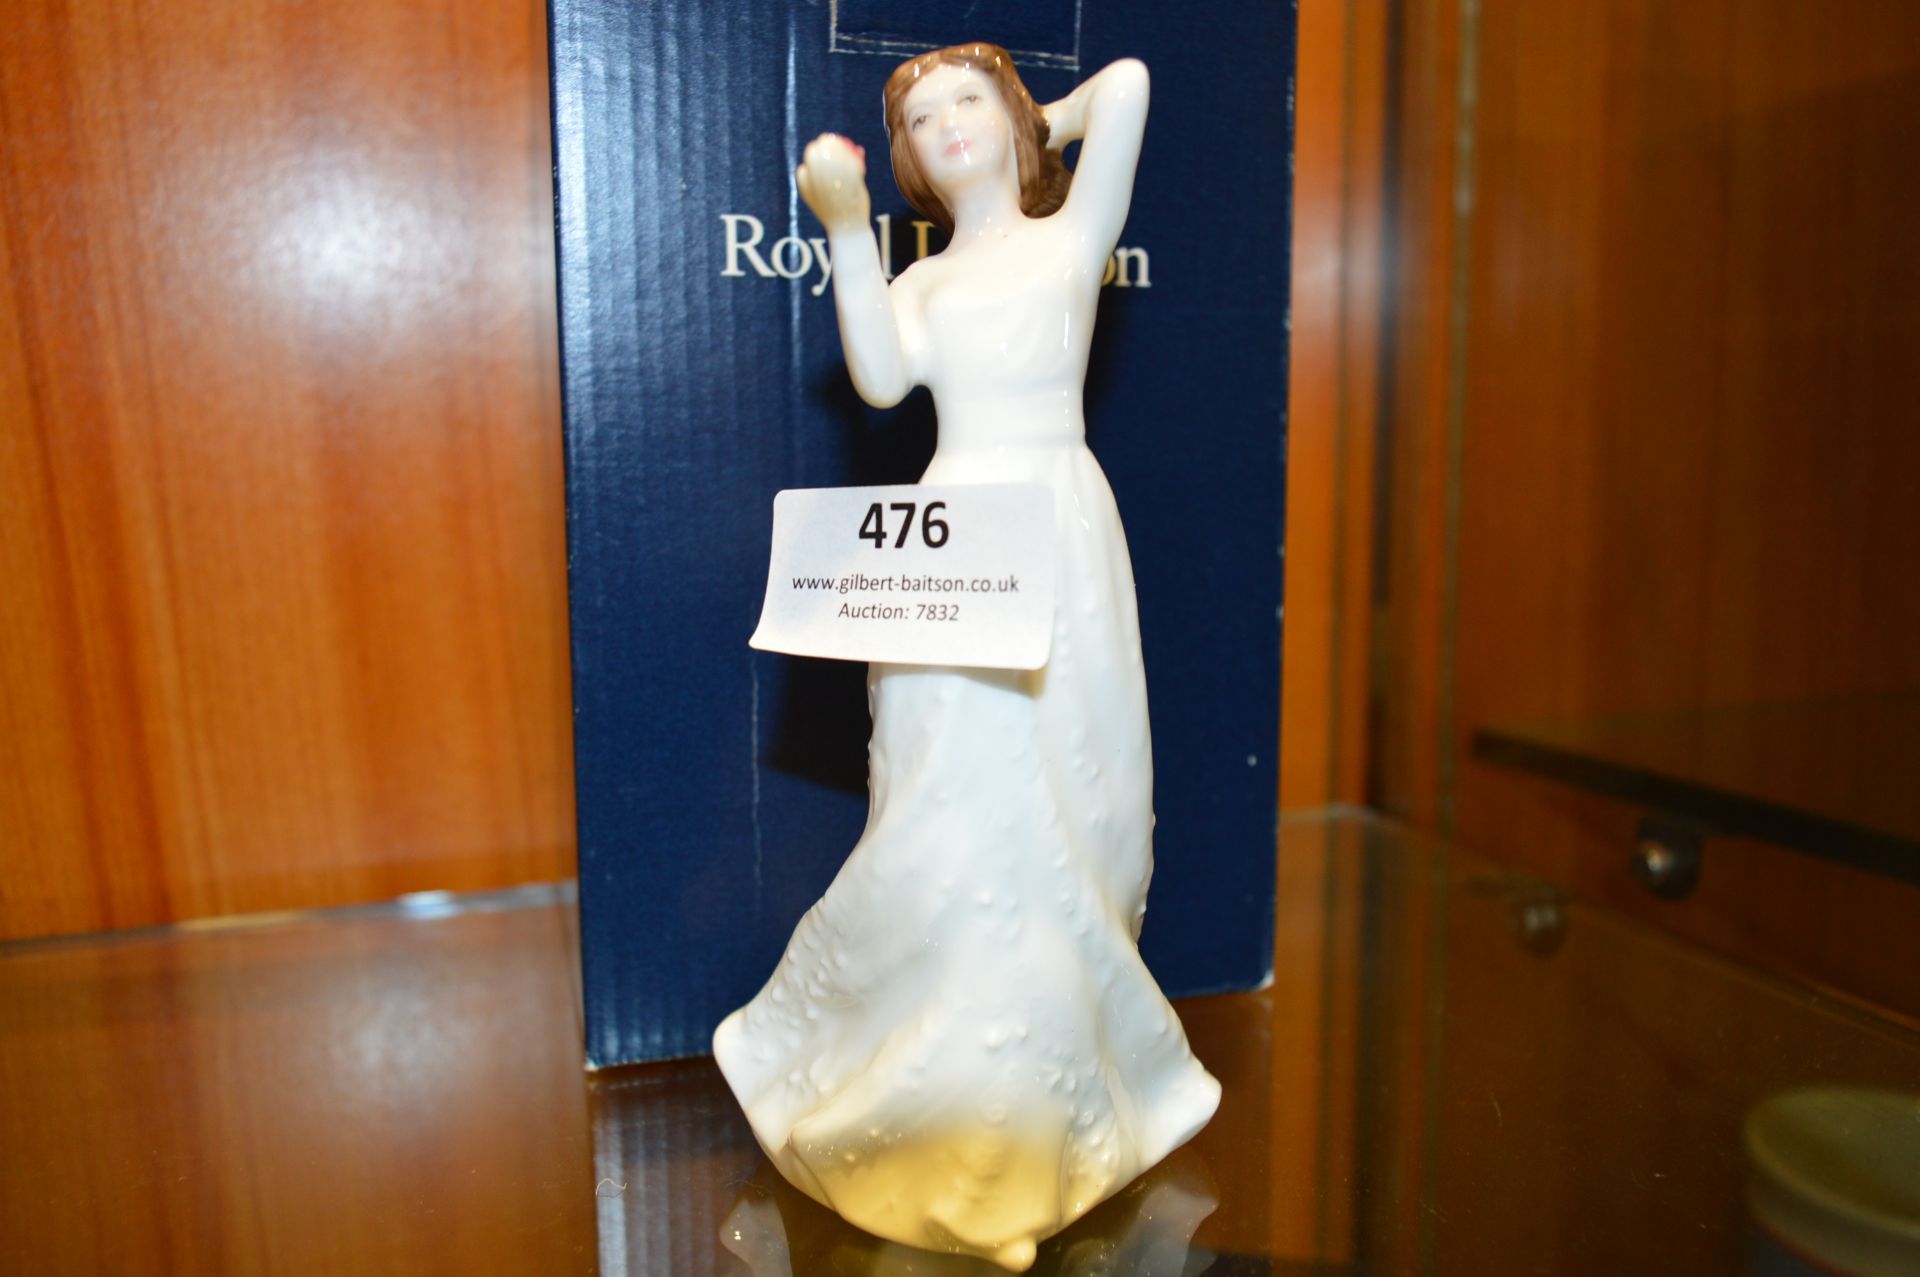 Royal Doulton Figurine "With Love"